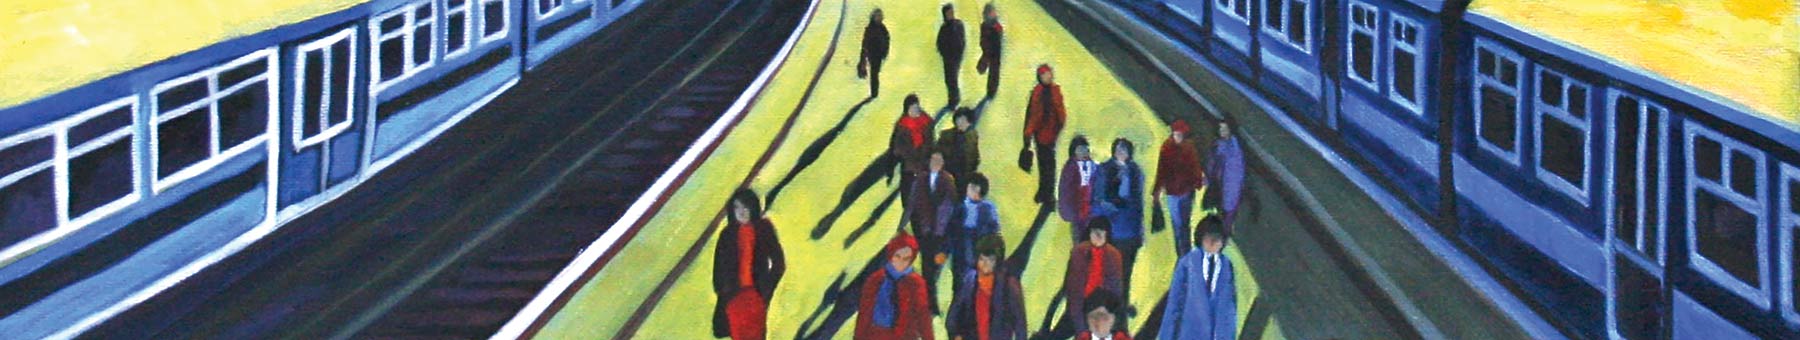 painting of passengers getting off of trains at a train station